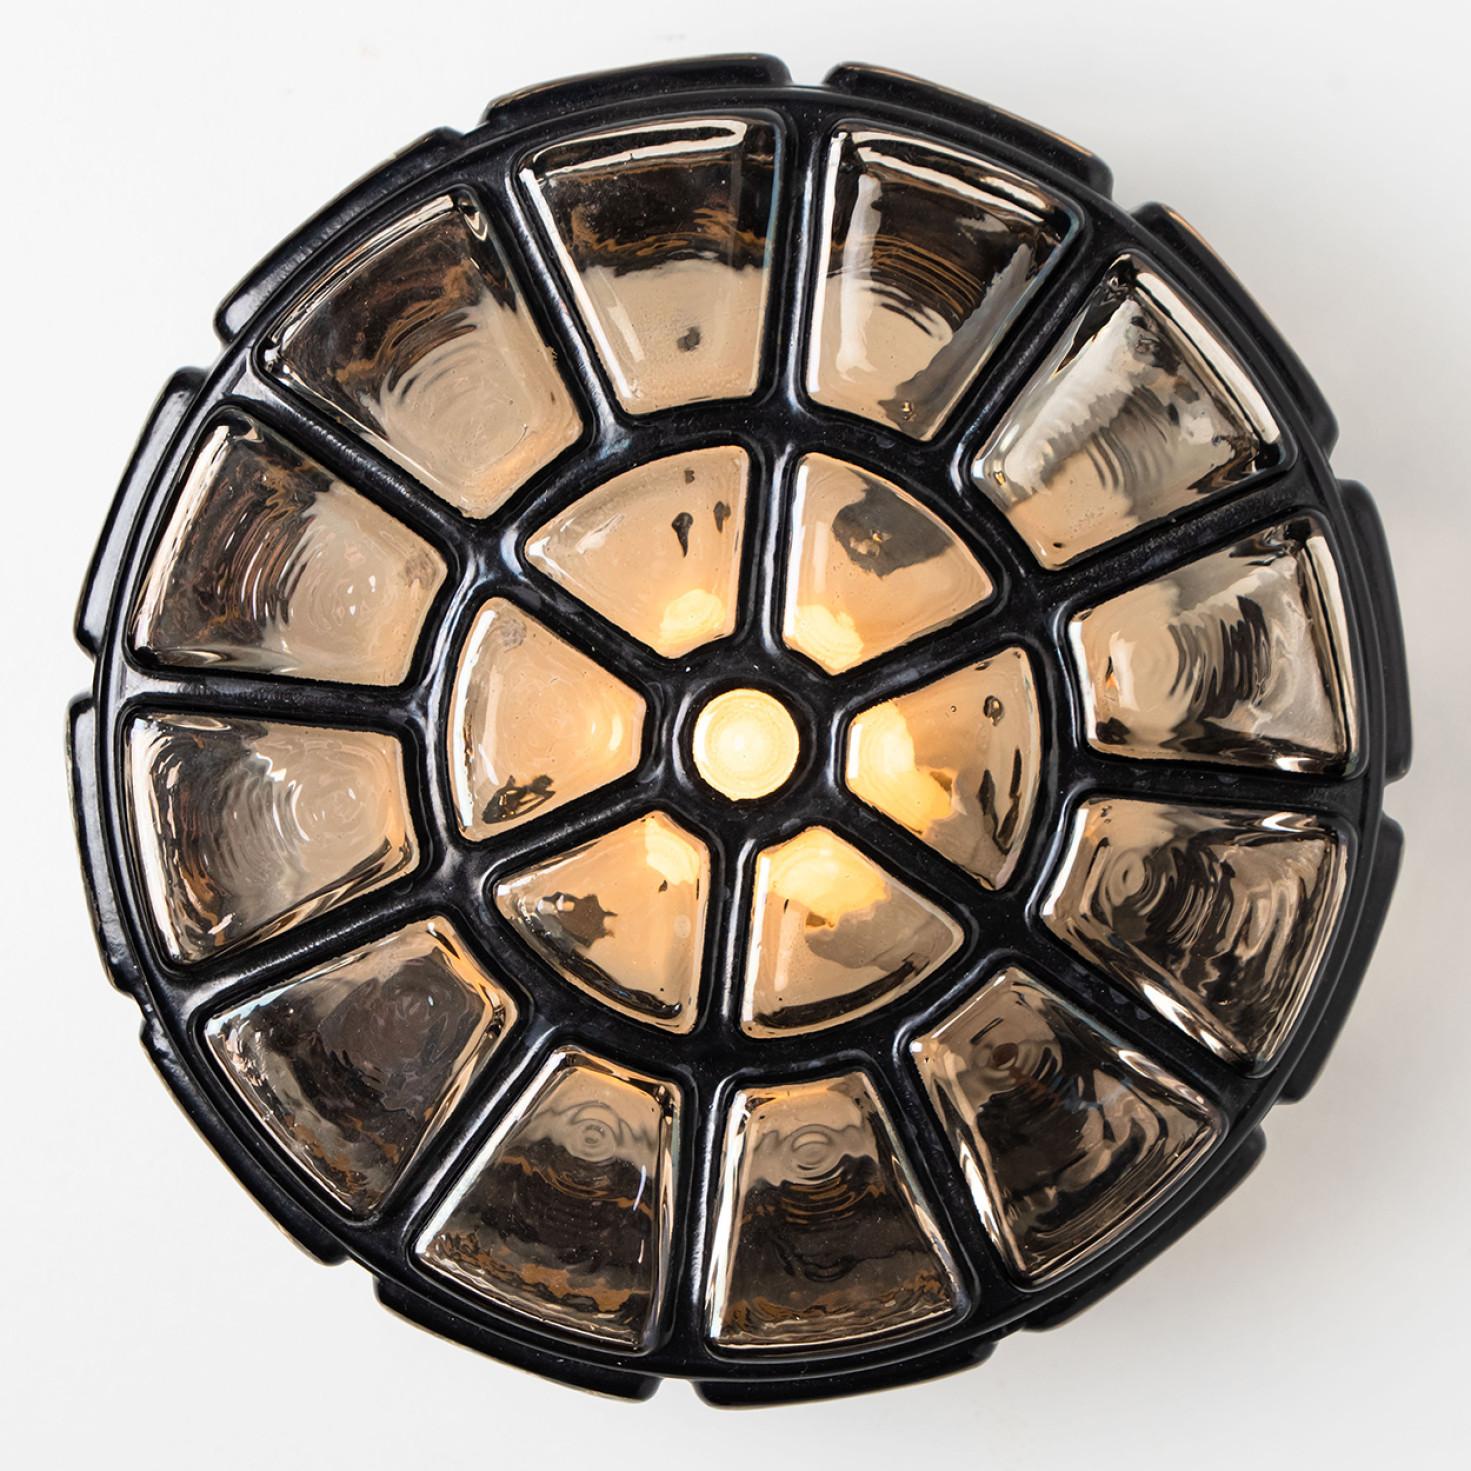 A wonderful round iron flush mount, circa 1970, made by Glashütte Limburg, Germany.
With hand blown smoked glass on brass base and a cage-like structure in iron. Illuminates beautifully.
Can either be mounted on the ceiling or on a wall.

Please